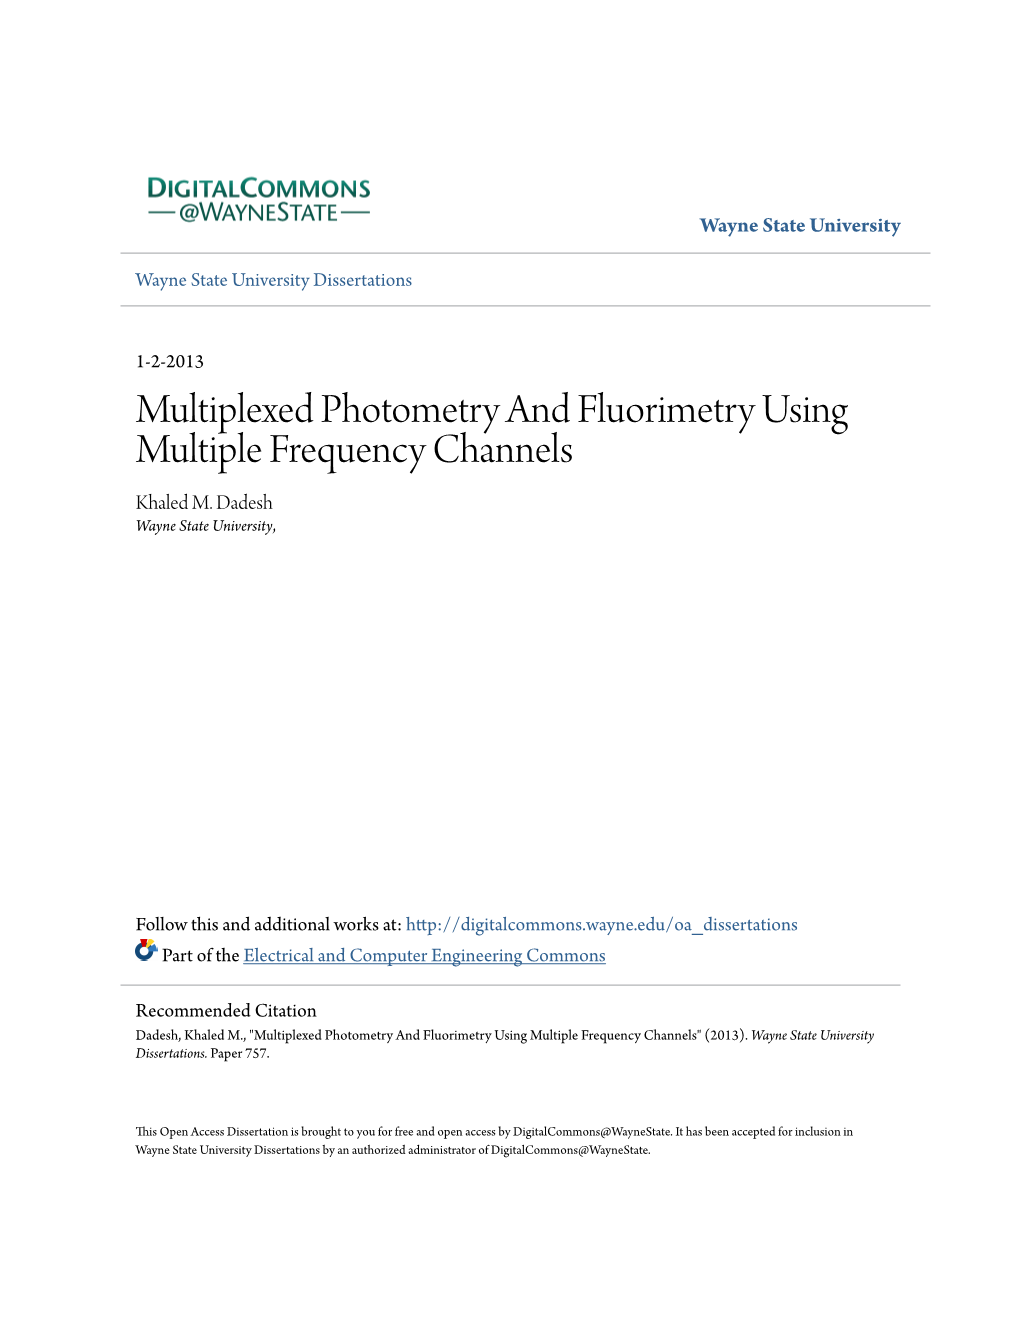 Multiplexed Photometry and Fluorimetry Using Multiple Frequency Channels Khaled M